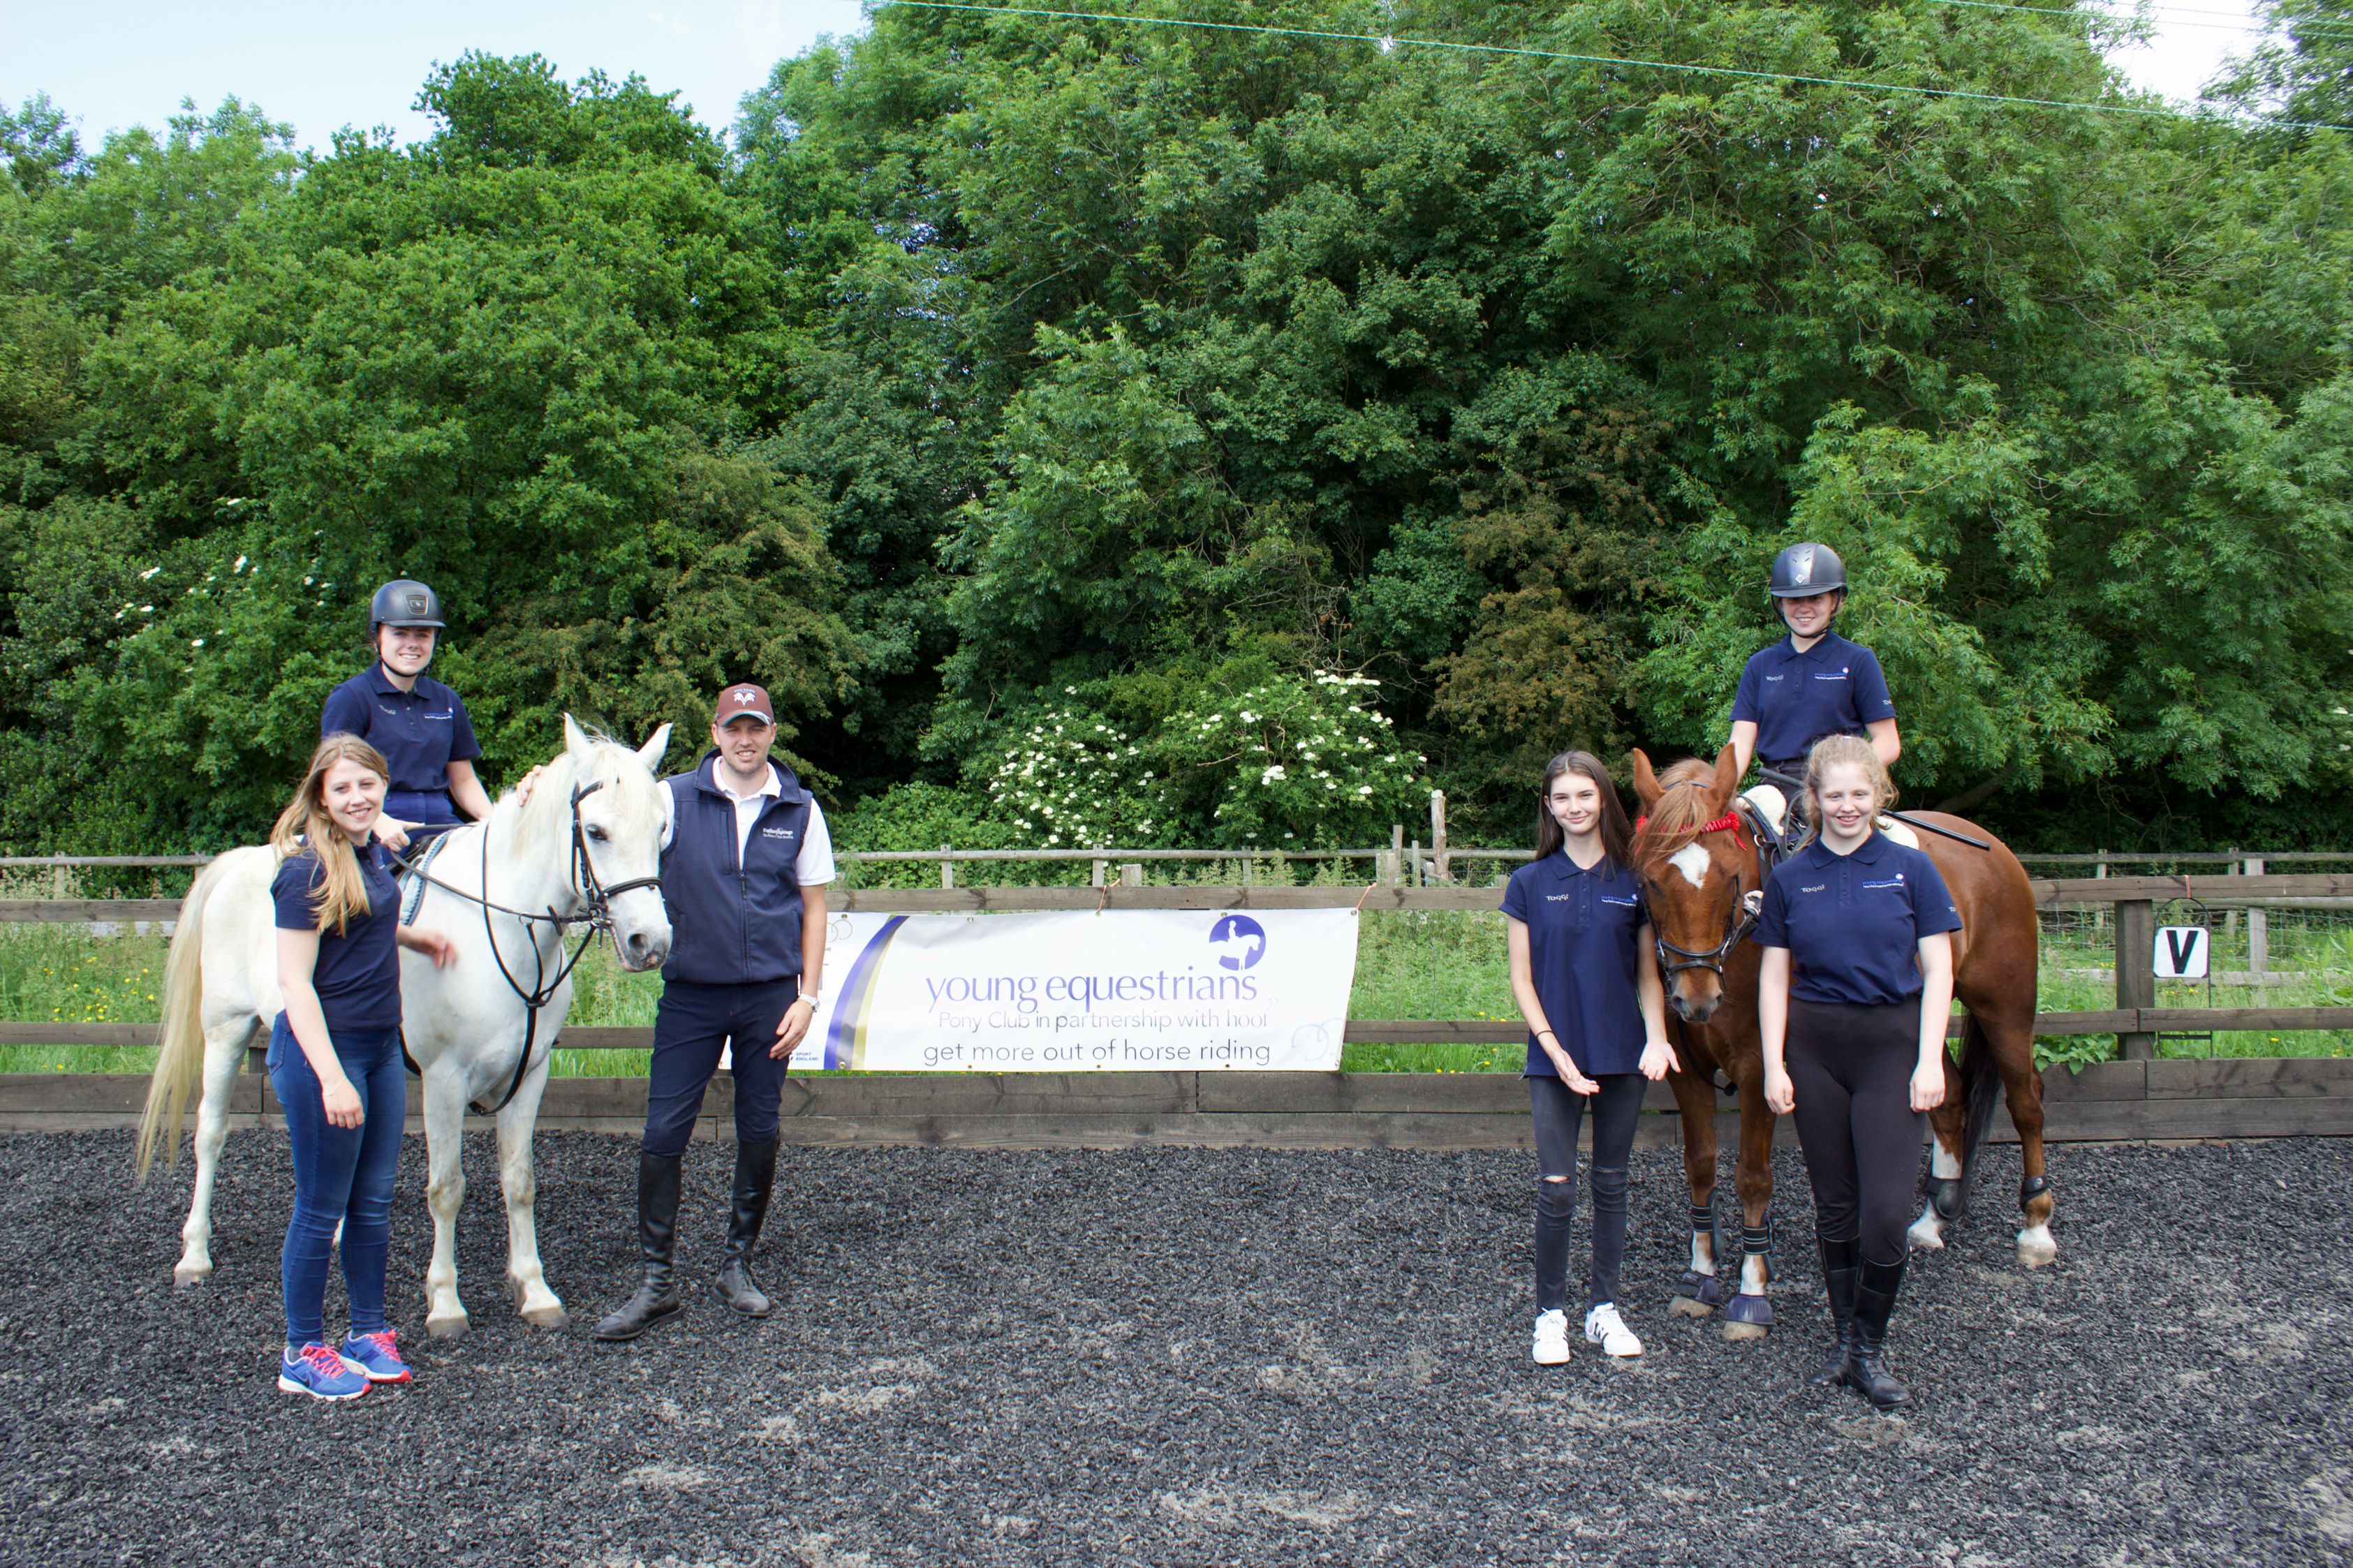 Squirrells Riding School Becomes 100th Young Equestrians Centre